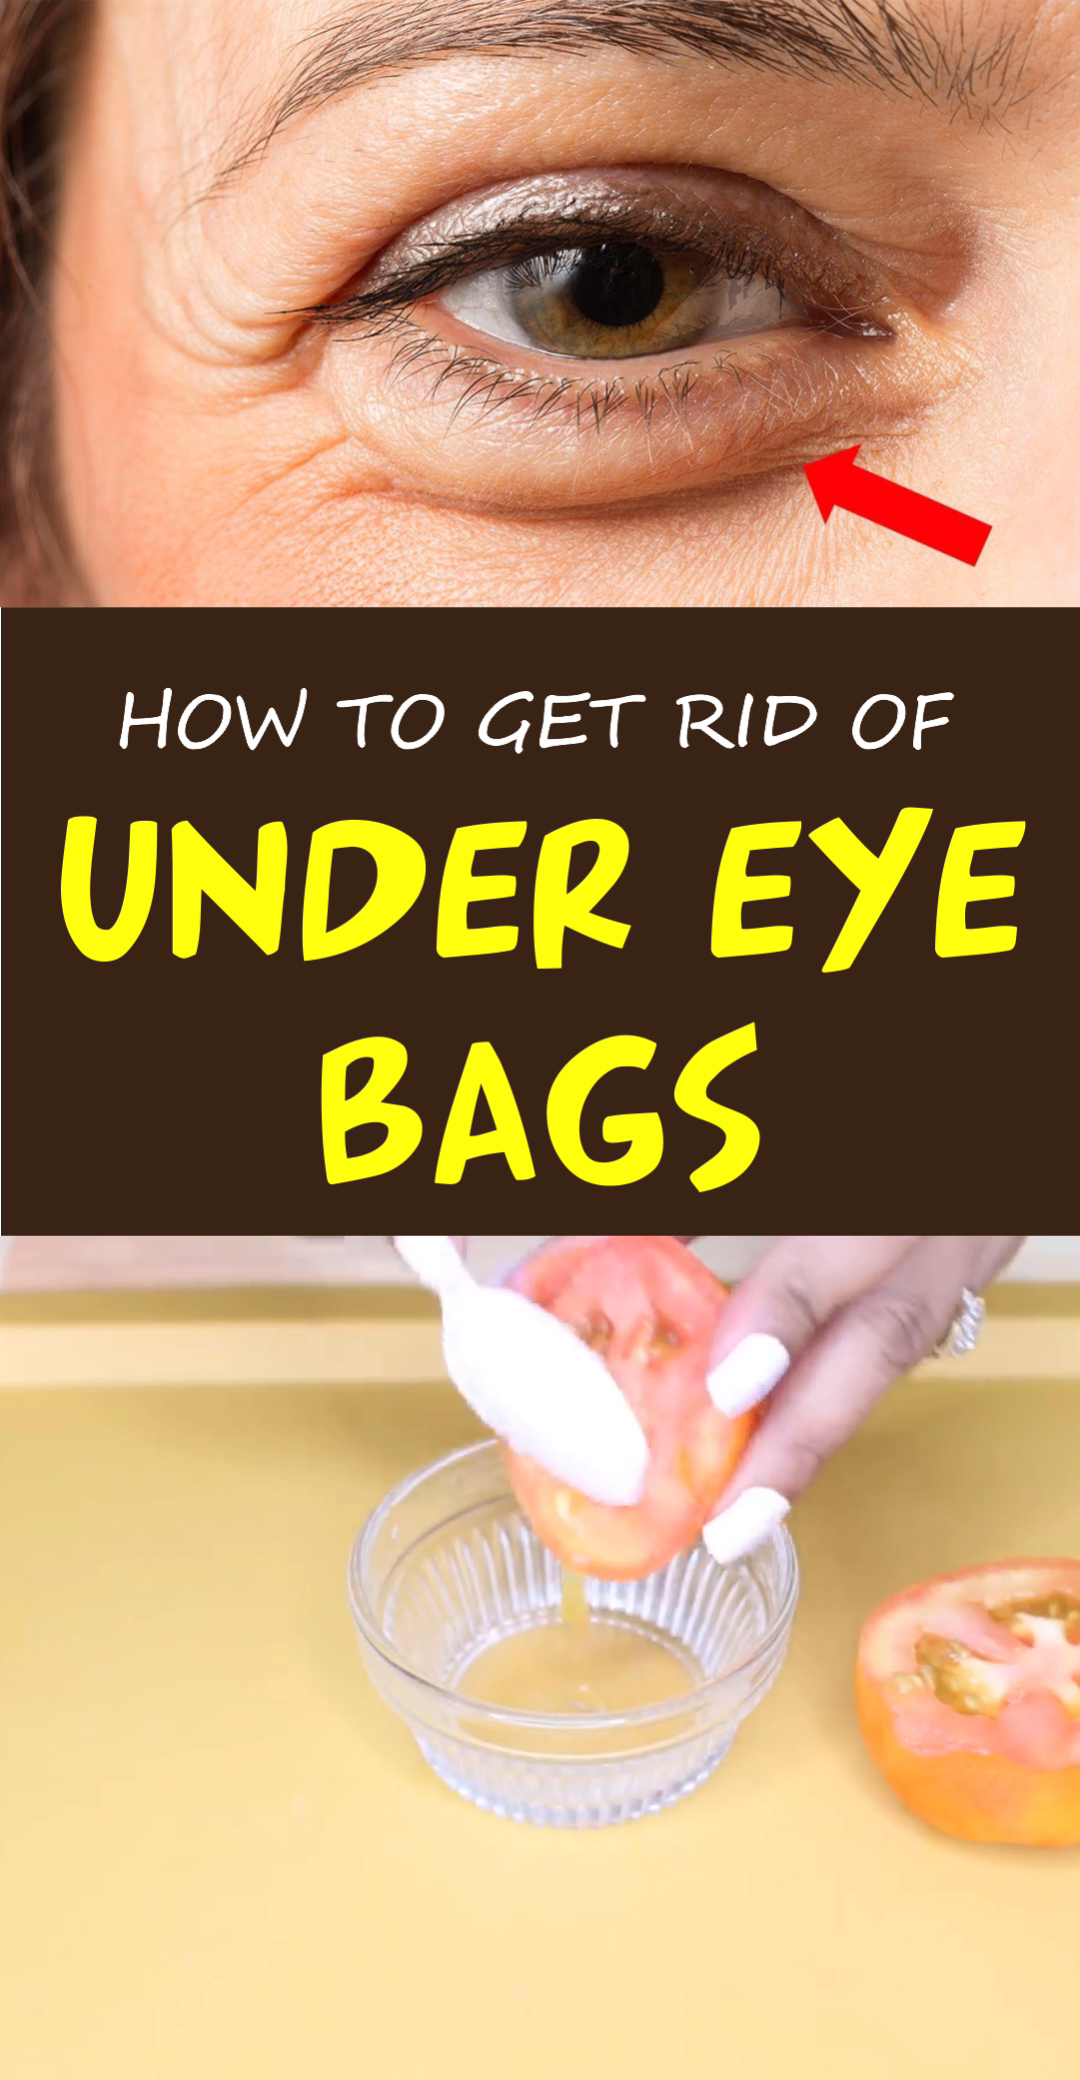 How to Get Rid of Dark Circles Under Your Eyes: Top 9 Home Remedies that Work - How to Get Rid of Dark Circles Under Your Eyes: Top 9 Home Remedies that Work -   18 simple beauty Hacks ideas